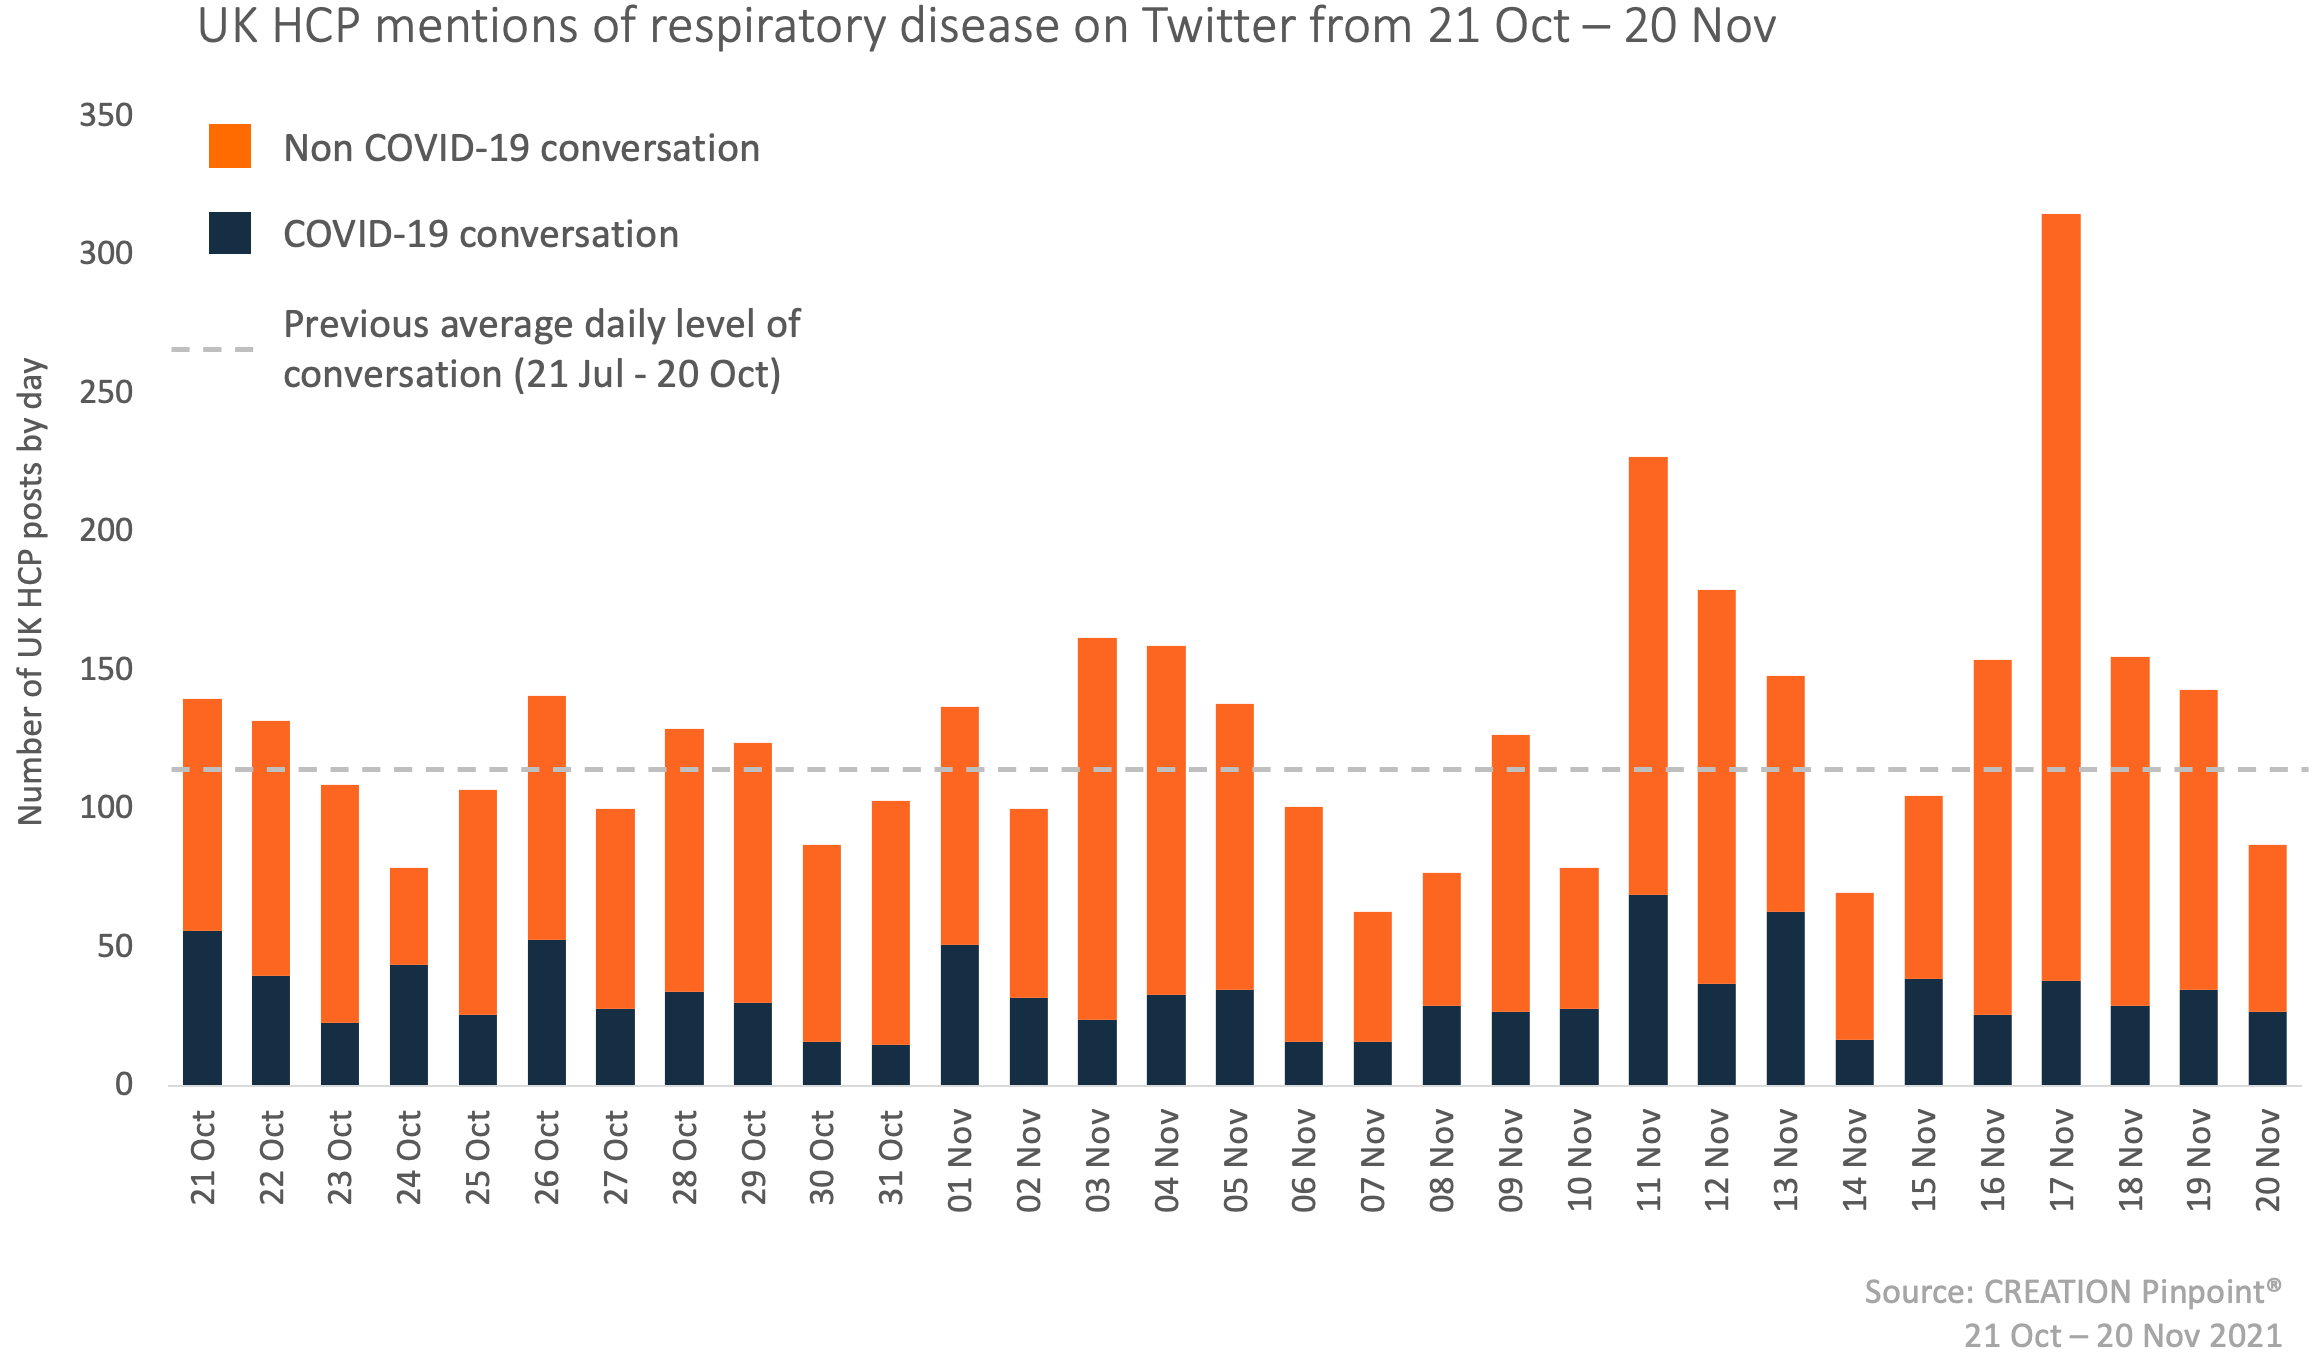 Graph showing UK HCP mentions of respiratory disease on Twitter between October and November 2021